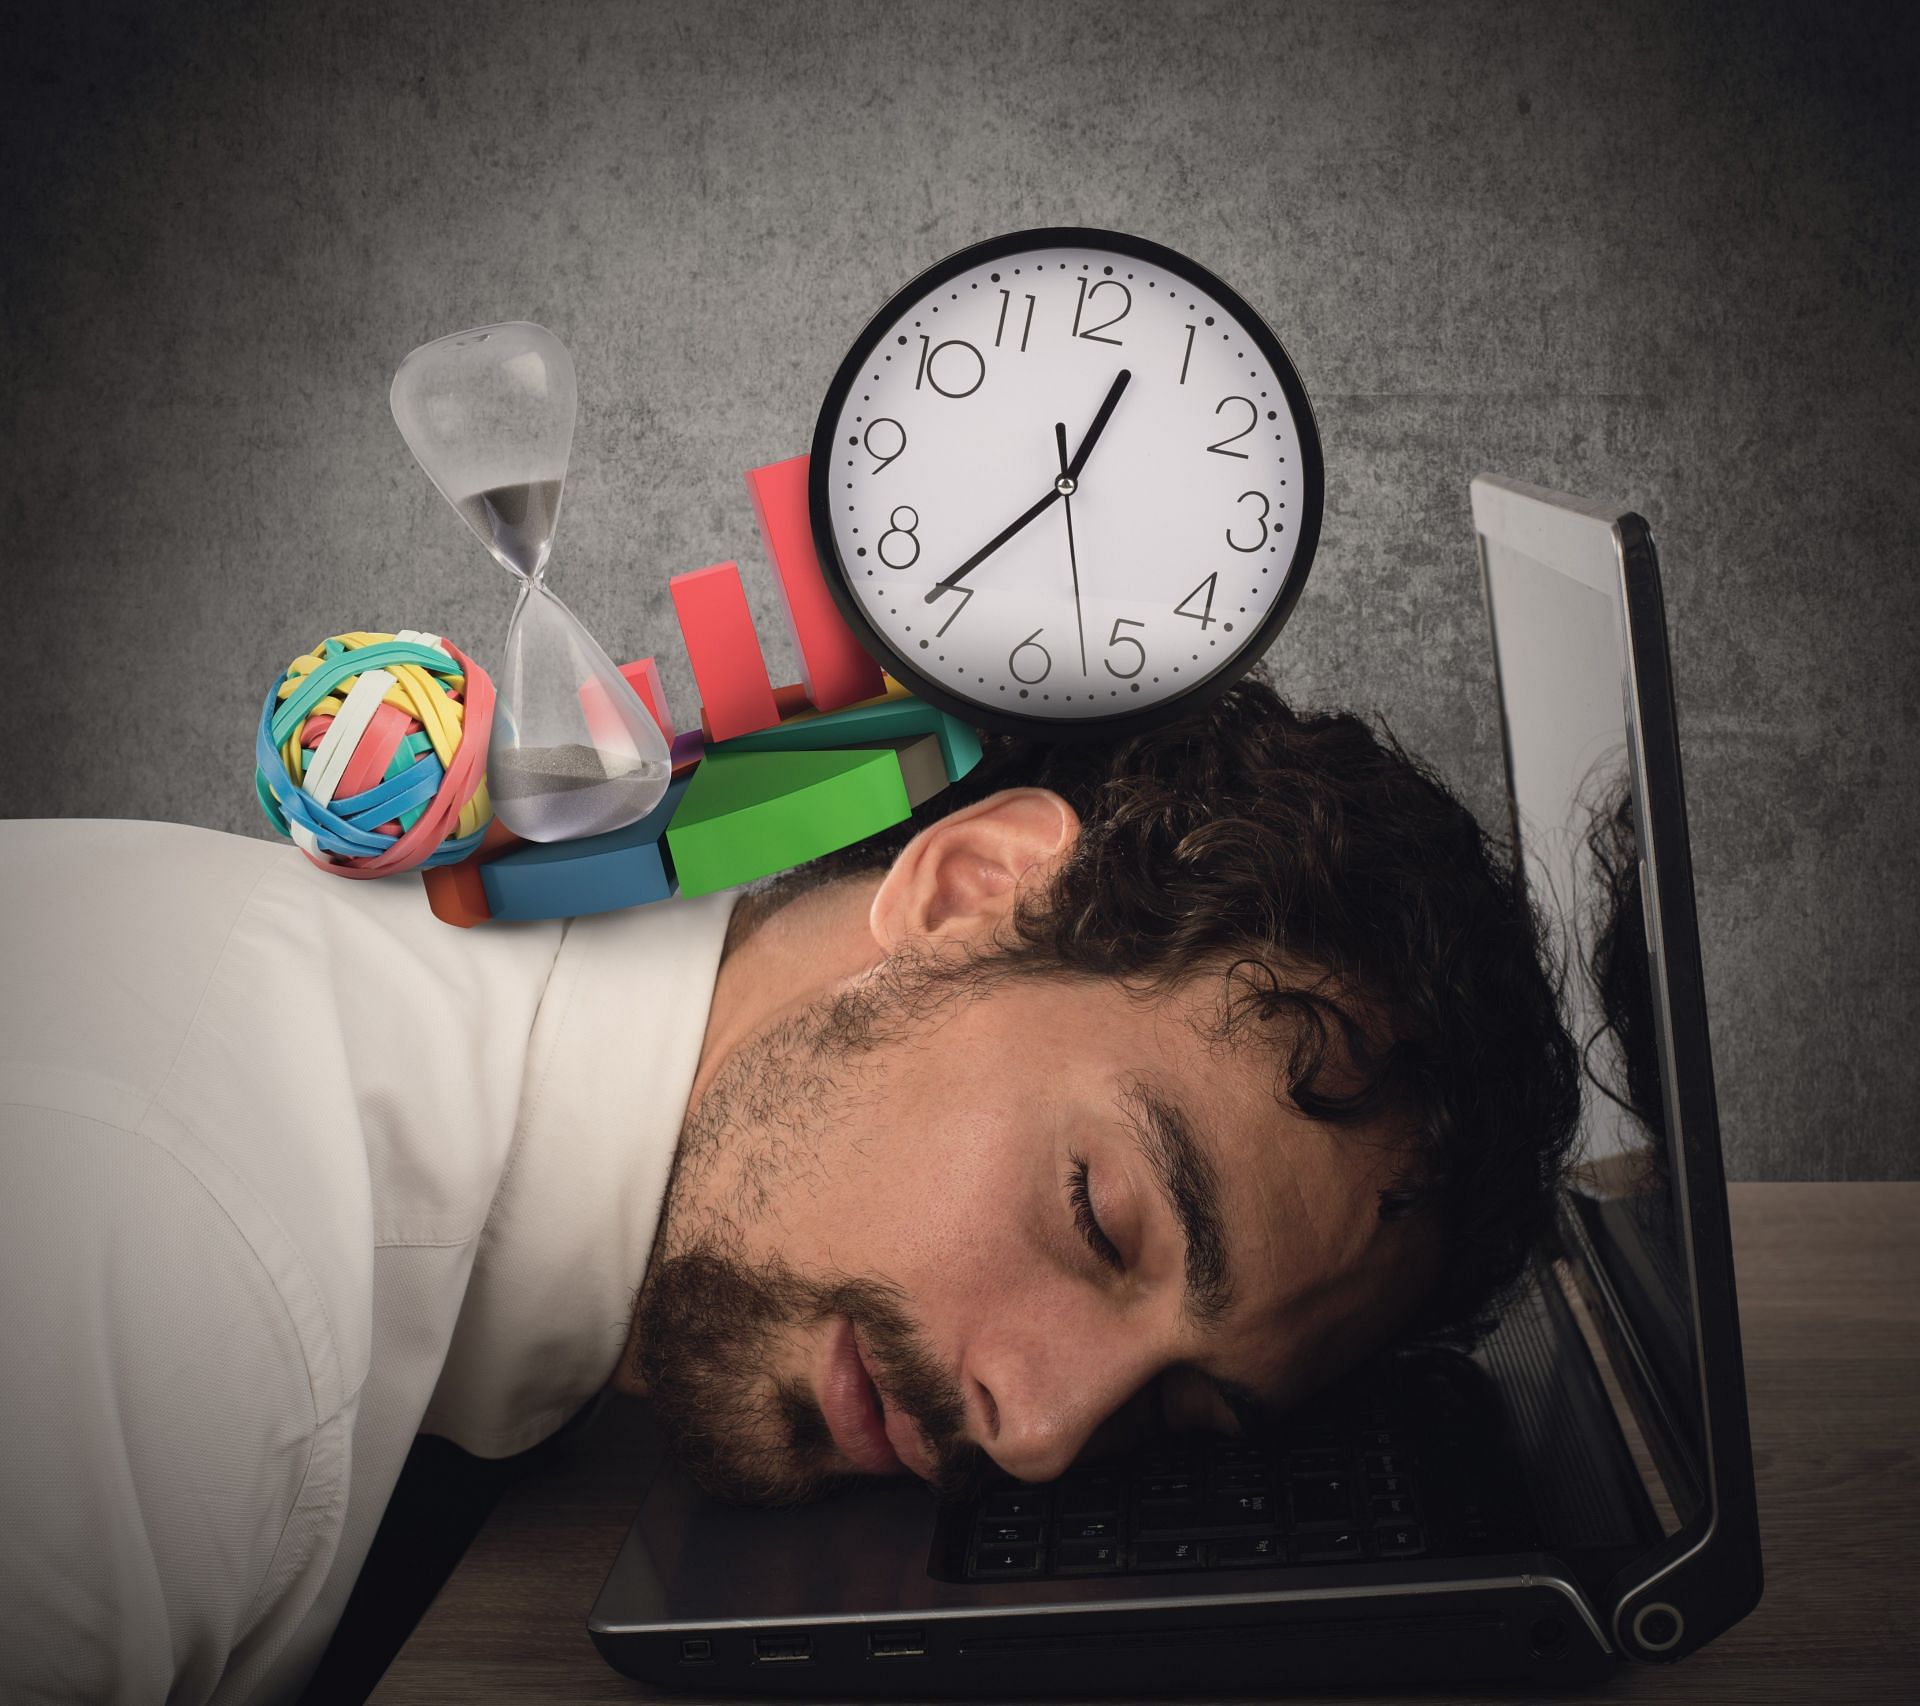 There are various types of procrastinators and they each have distinguishing characteristics. (Image via Vecteezy/ Vecteezy)